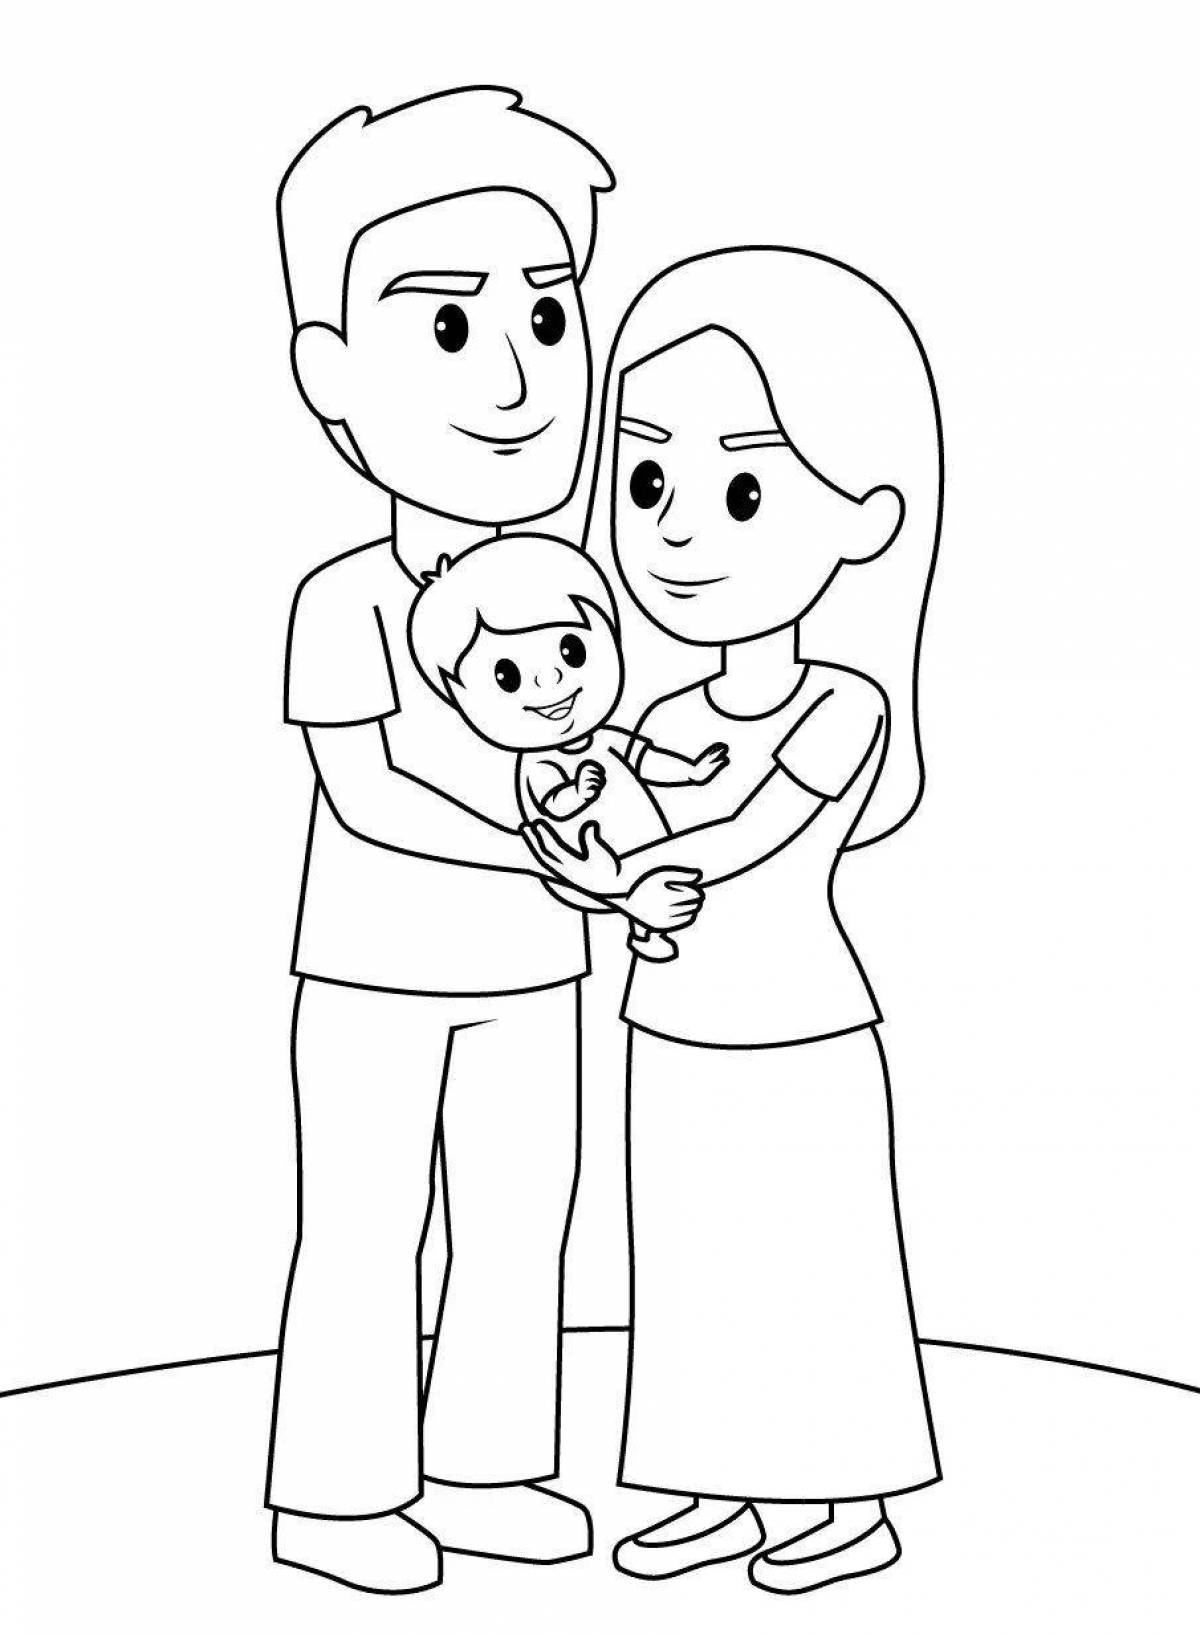 Happy parenting coloring pages